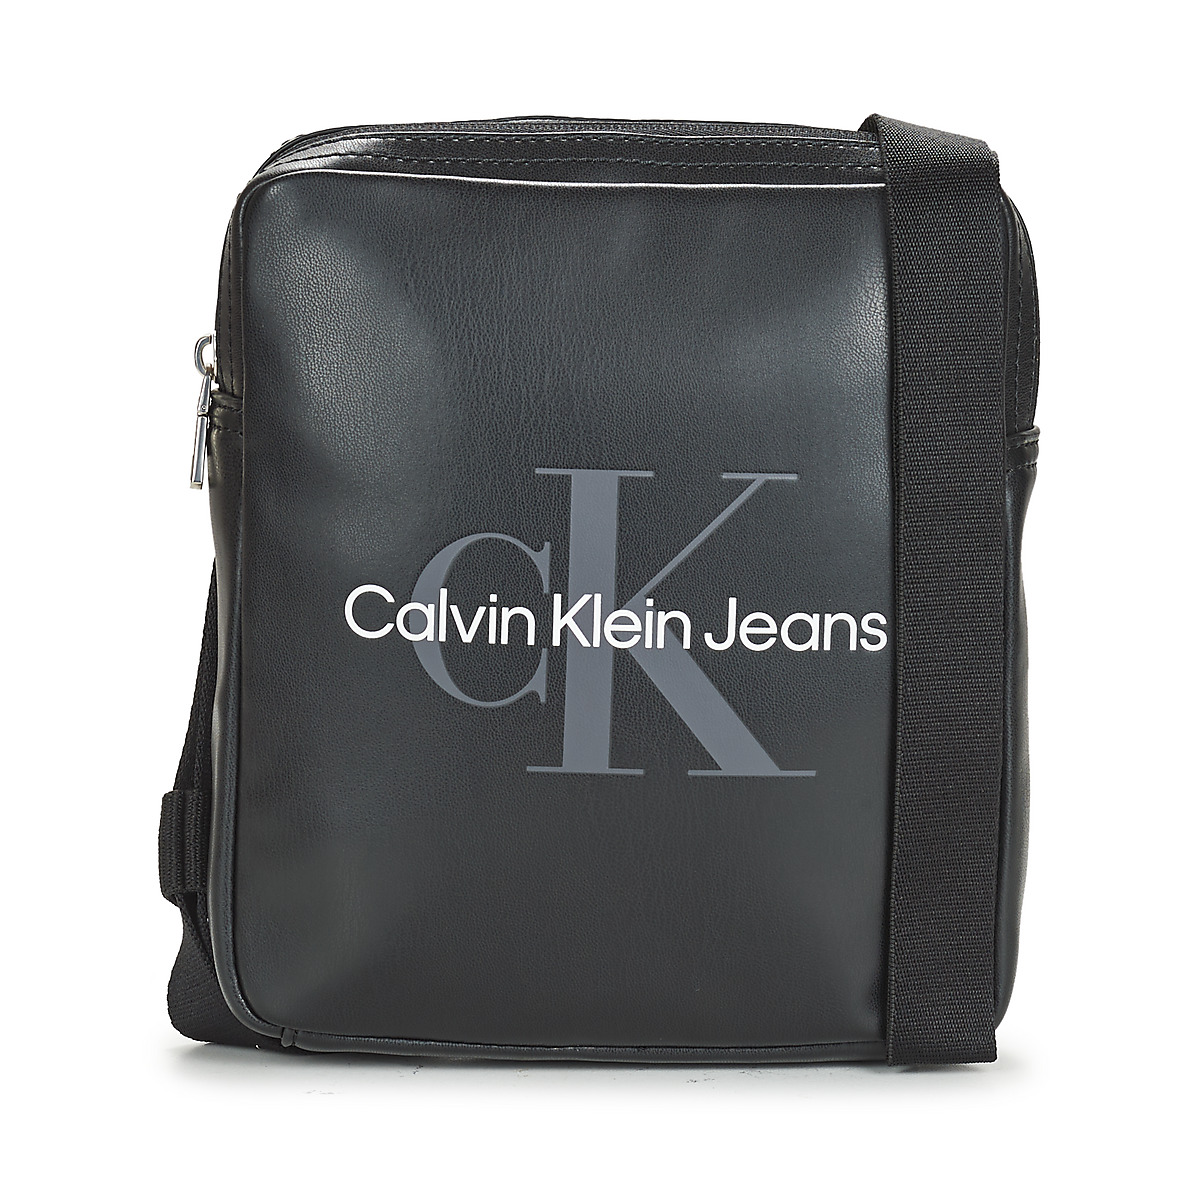 Calvin Klein REPORTER18 ! SOFT - | Jeans delivery Pouches Bags - Black 77,00 Clutches Spartoo Europe MONOGRAM Men Fast € 